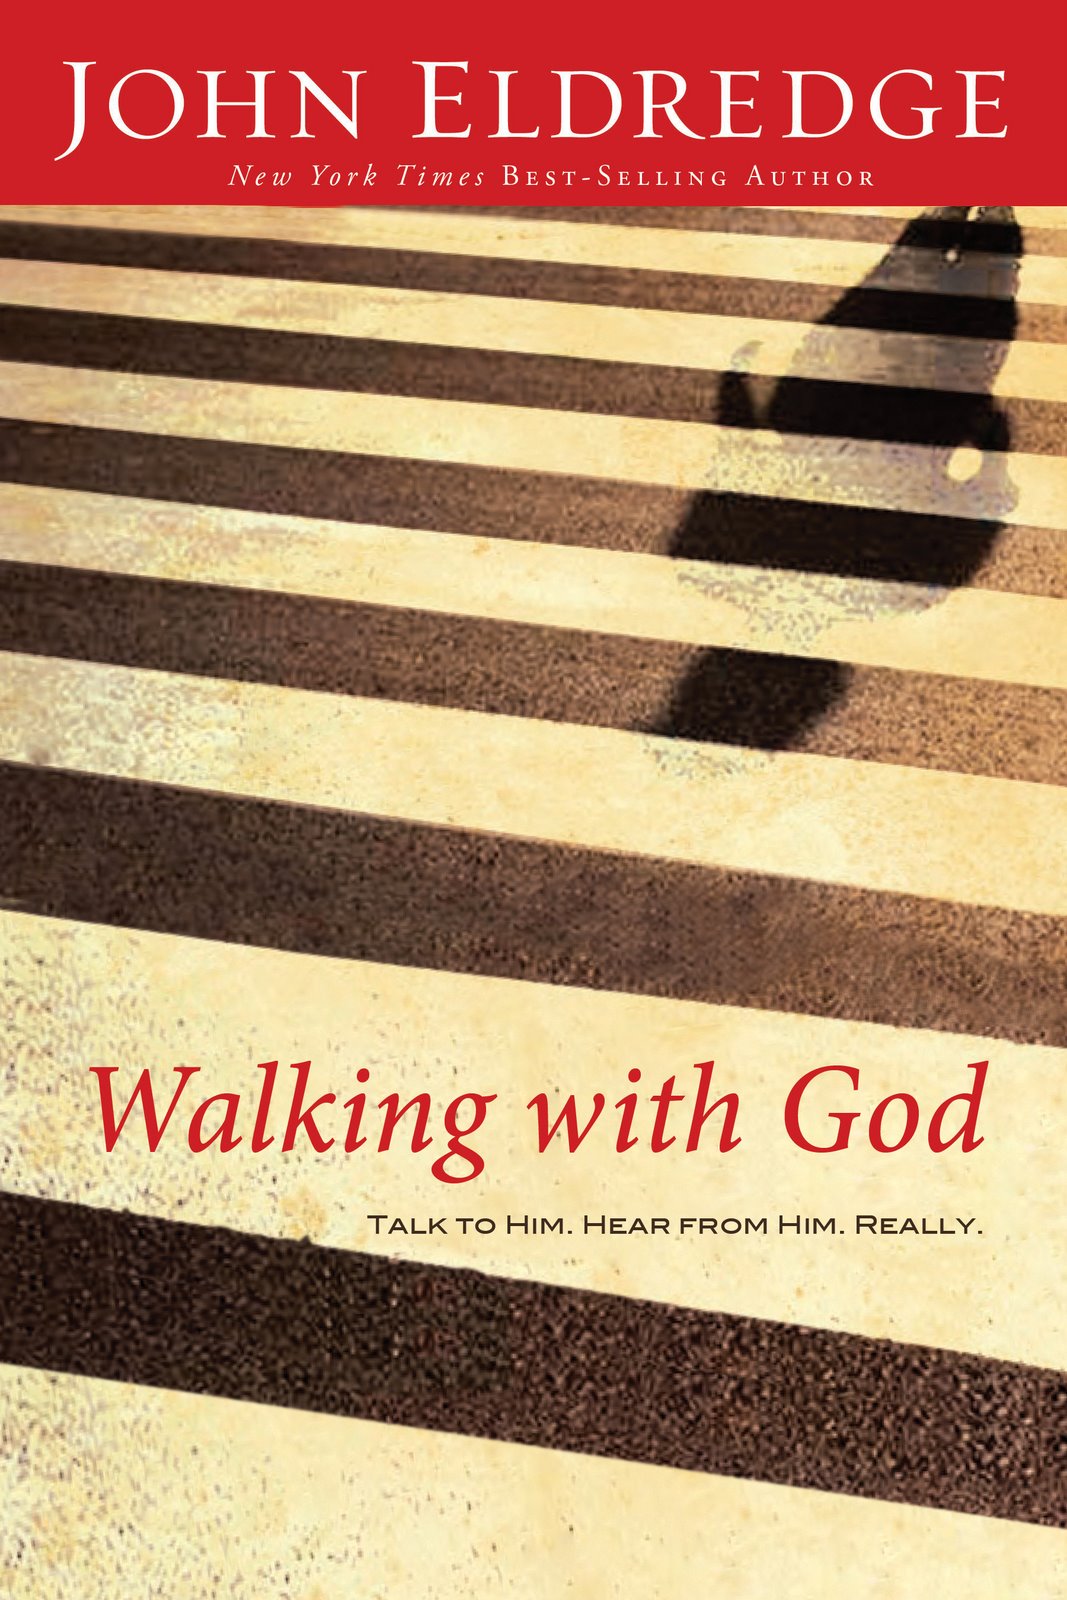 [Walking+with+God+Cover.jpg]